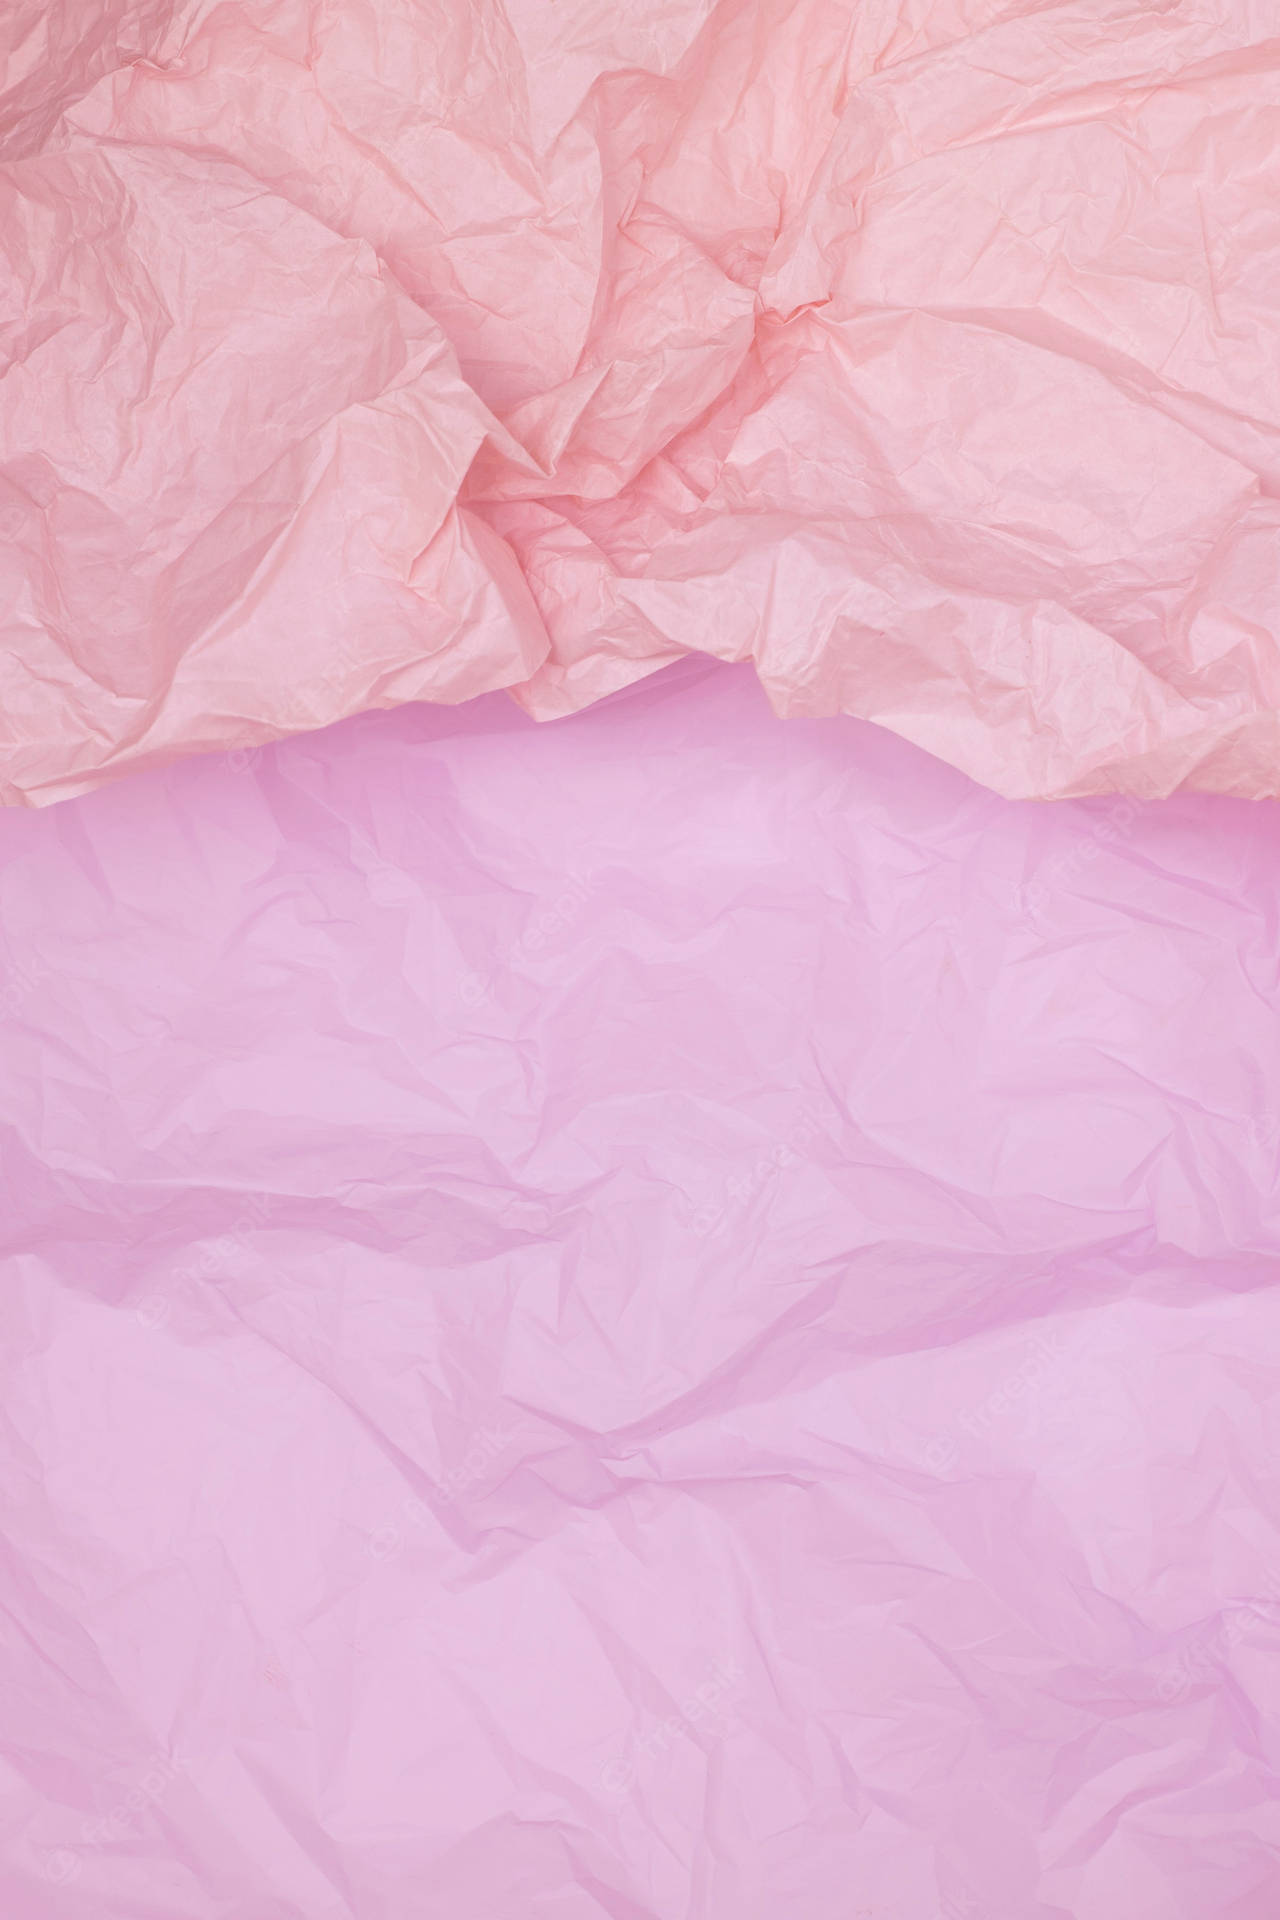 Light Pink Crumpled Paper Background